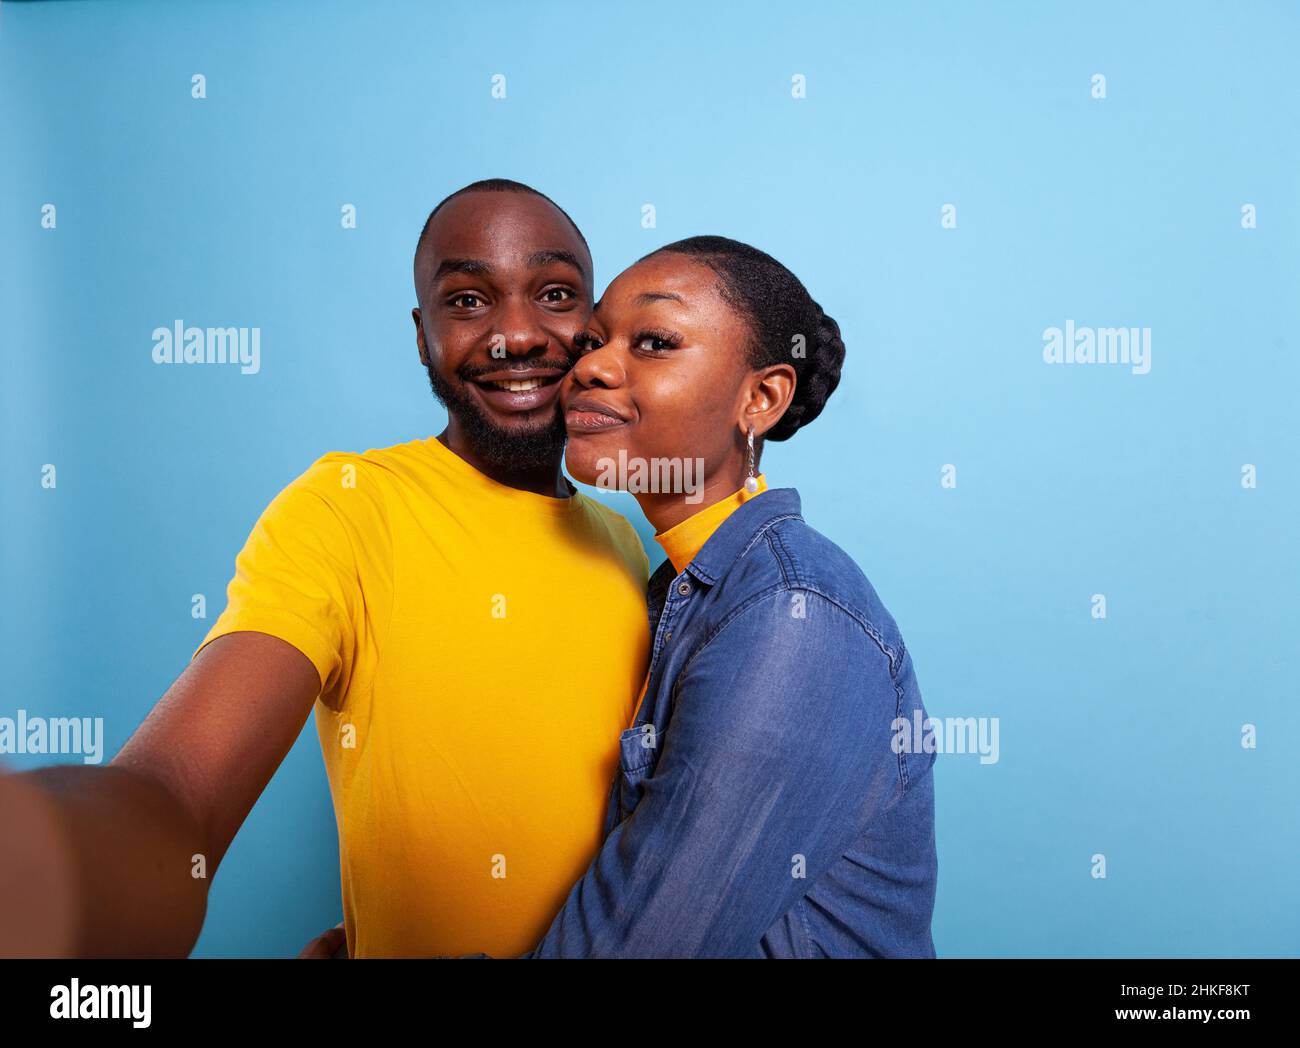 POV of people in relationship smiling in front of camera, taking pictures together in studio. Cheerful couple using phone in hand to take selfies and share romance. Partners hugging each other Stock Photo